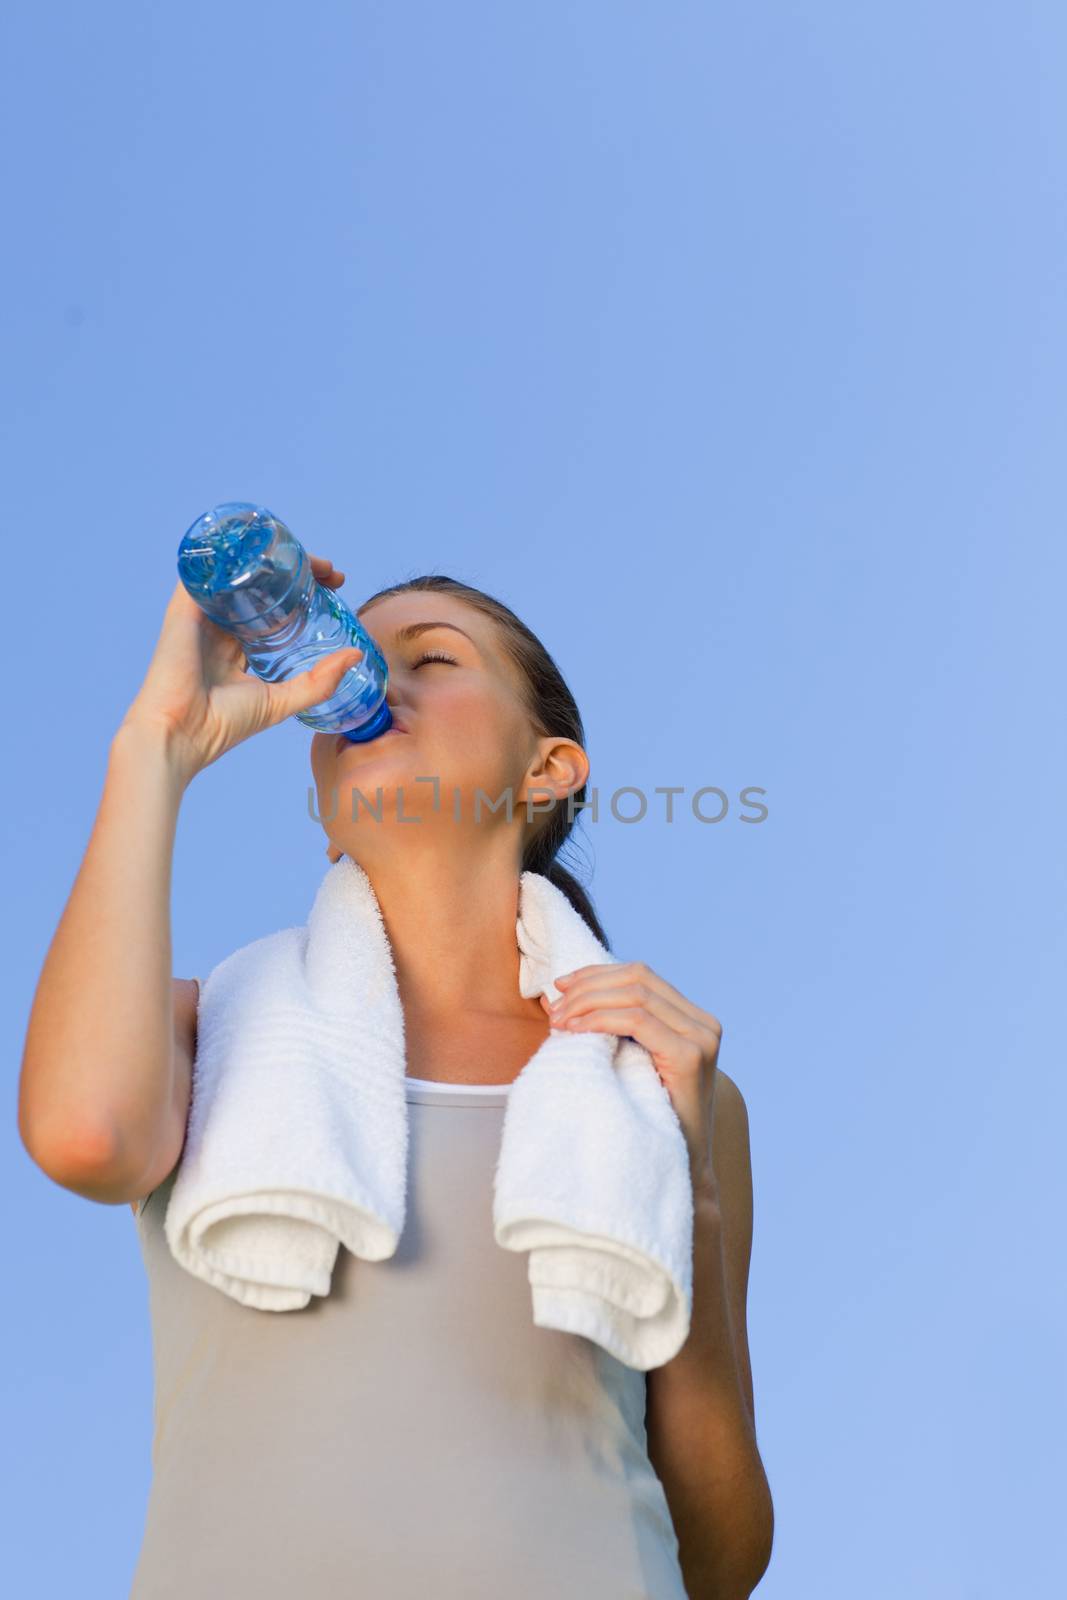 Young woman drinking water during the summer